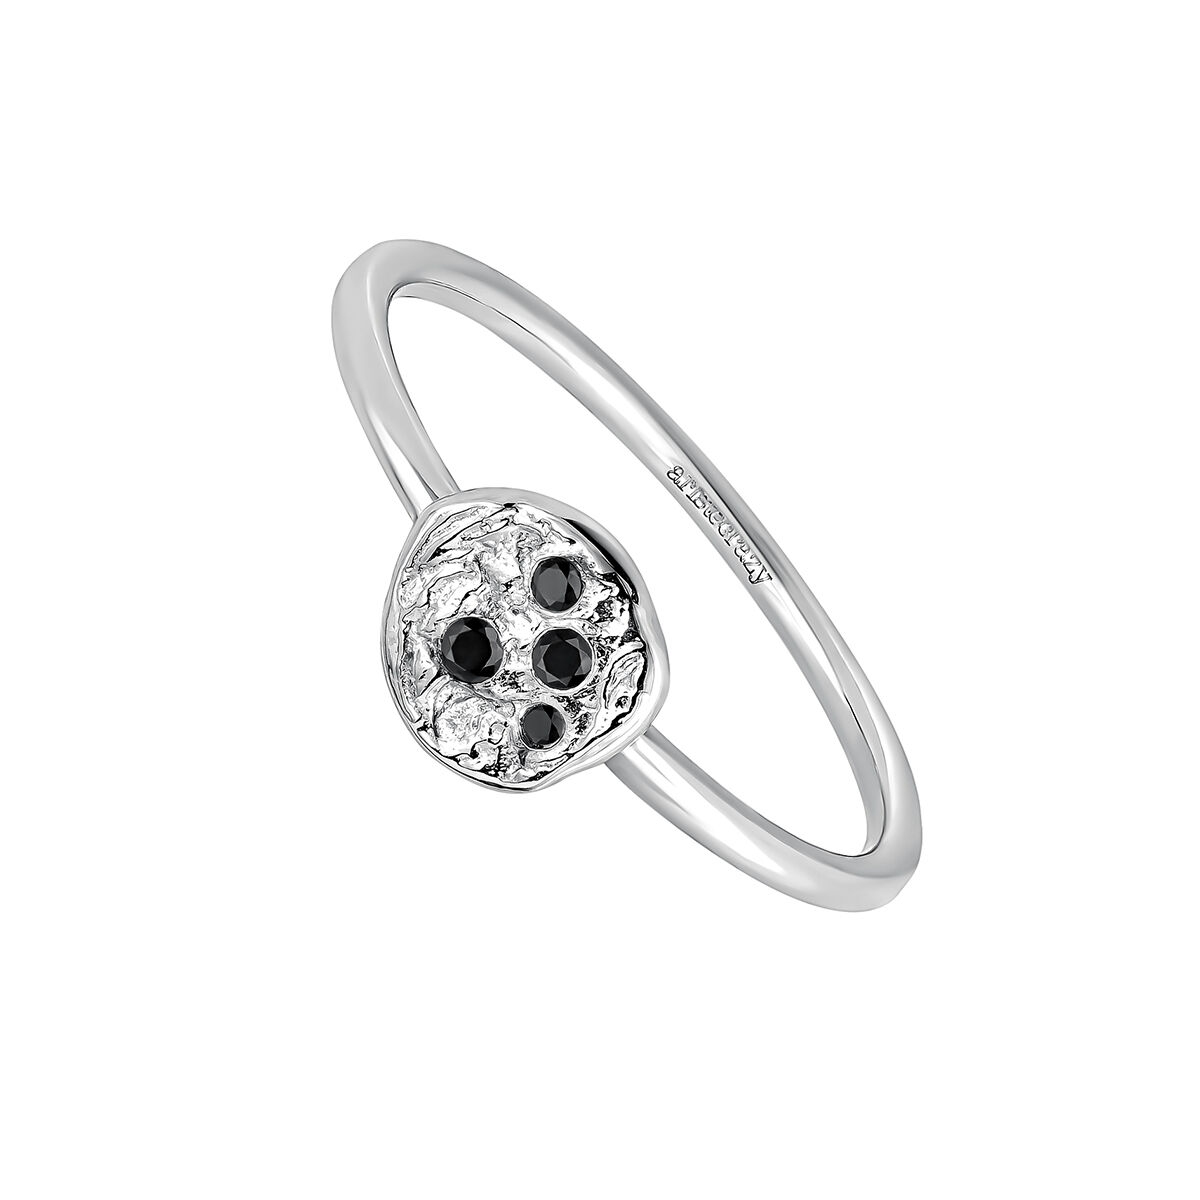 Silver ring with raised detail and black spinel gemstones, J05080-01-BSN, hi-res